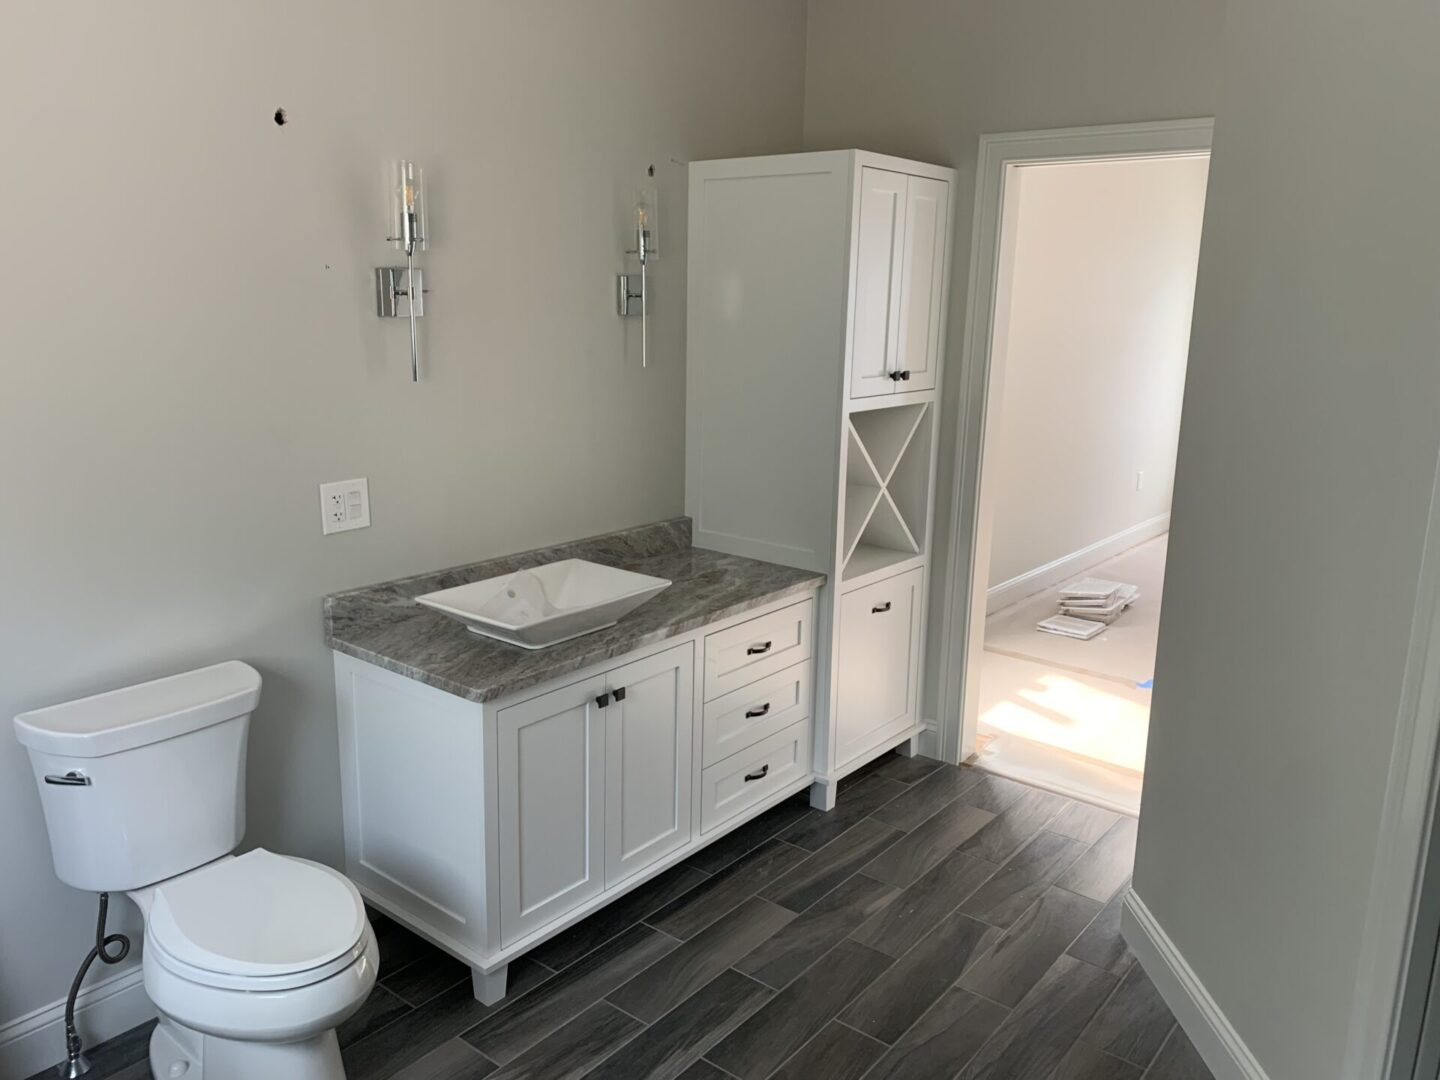 A Full White Fittings and Bathroom Cabinets